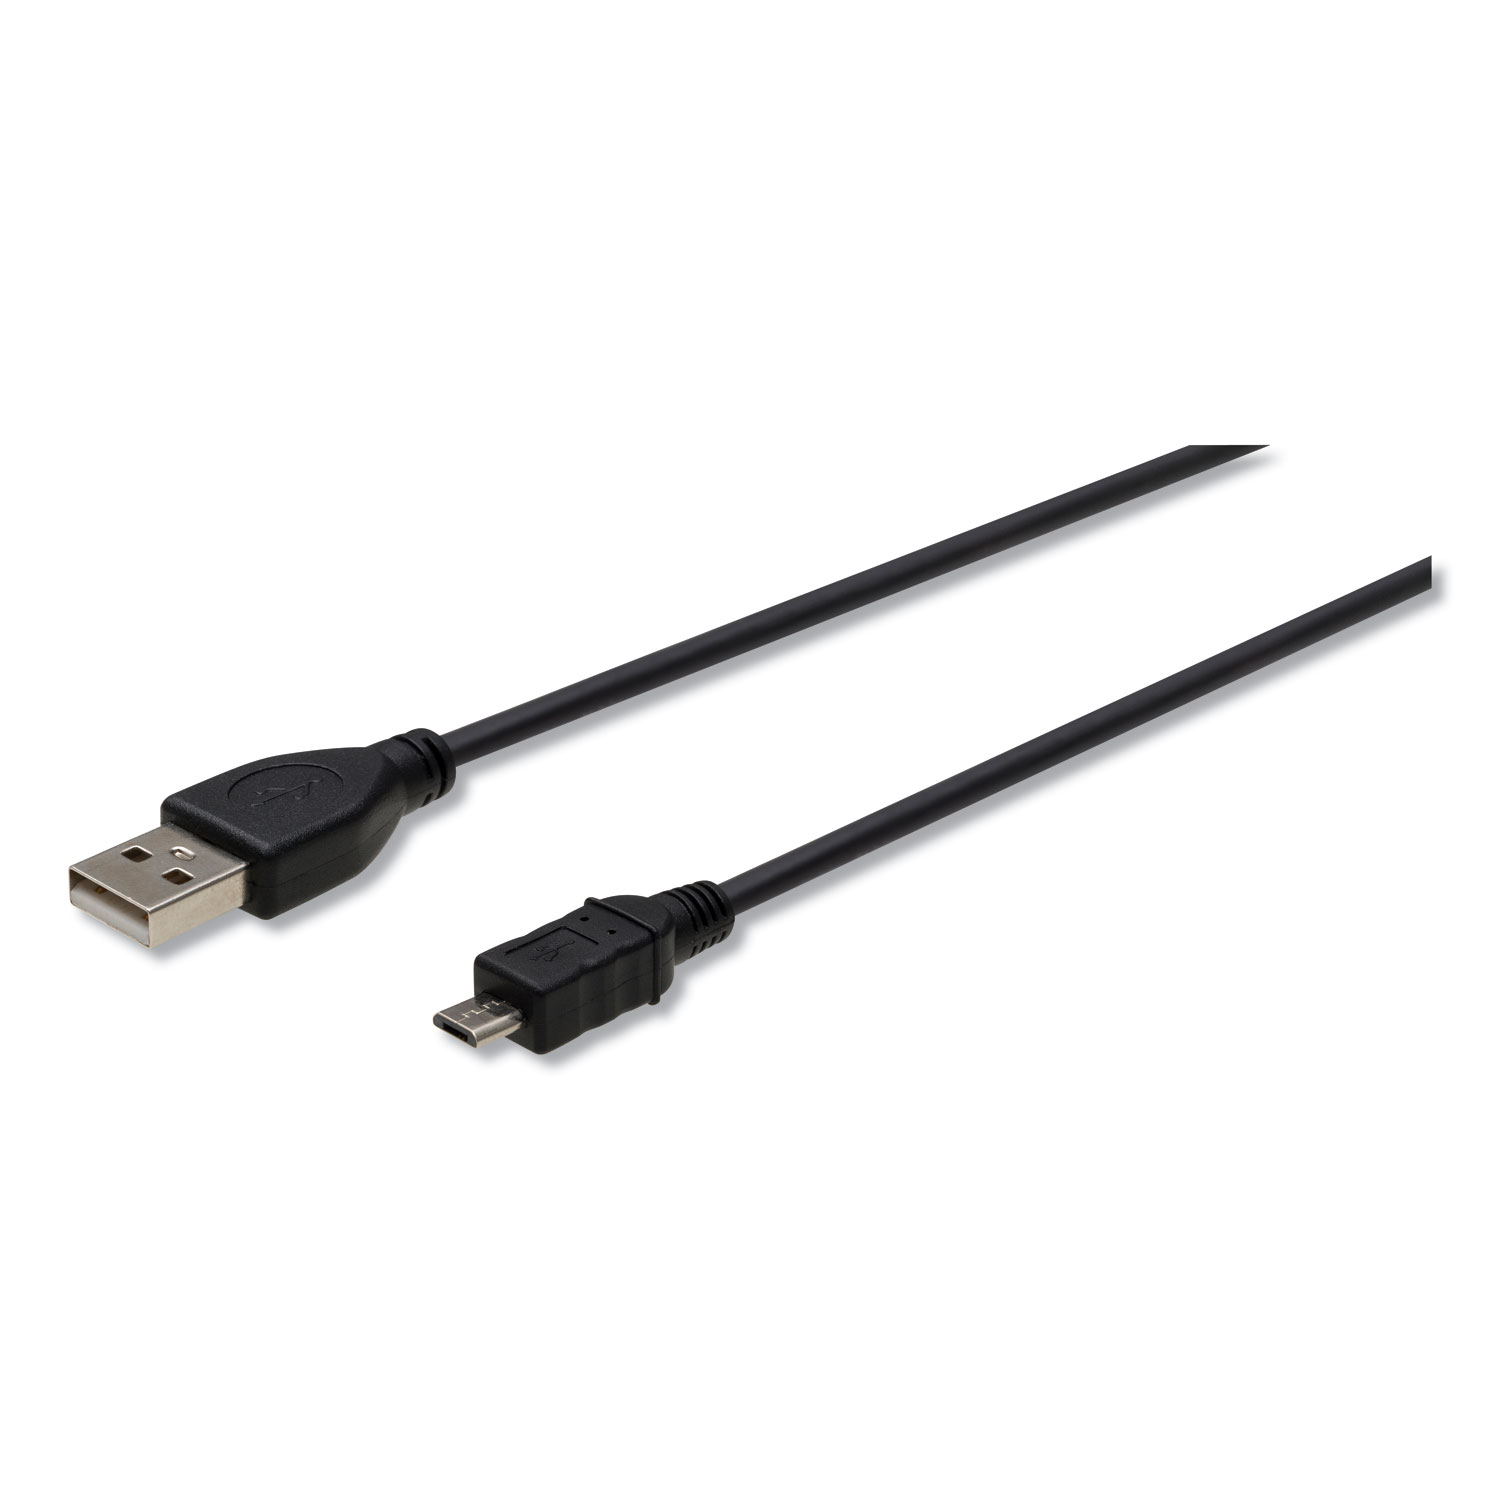 USB to Micro USB Cable, 10 ft, Black